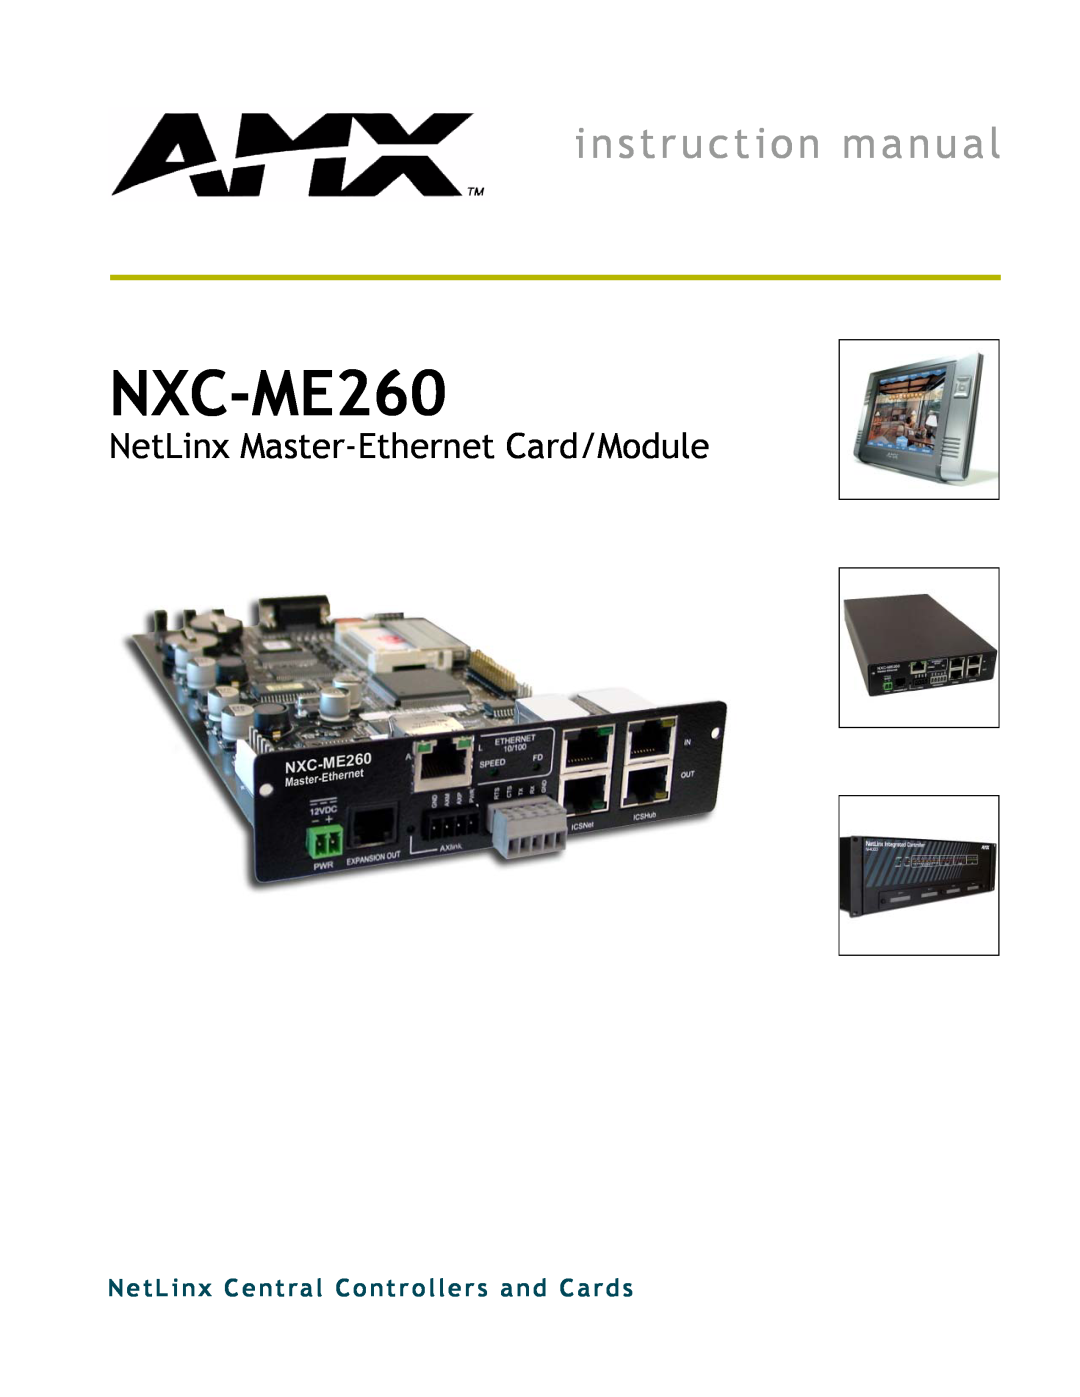 AMX NXC-ME260 instruction manual NetLinx Master-Ethernet Card/Module, NetLinx Central Controllers and Cards 